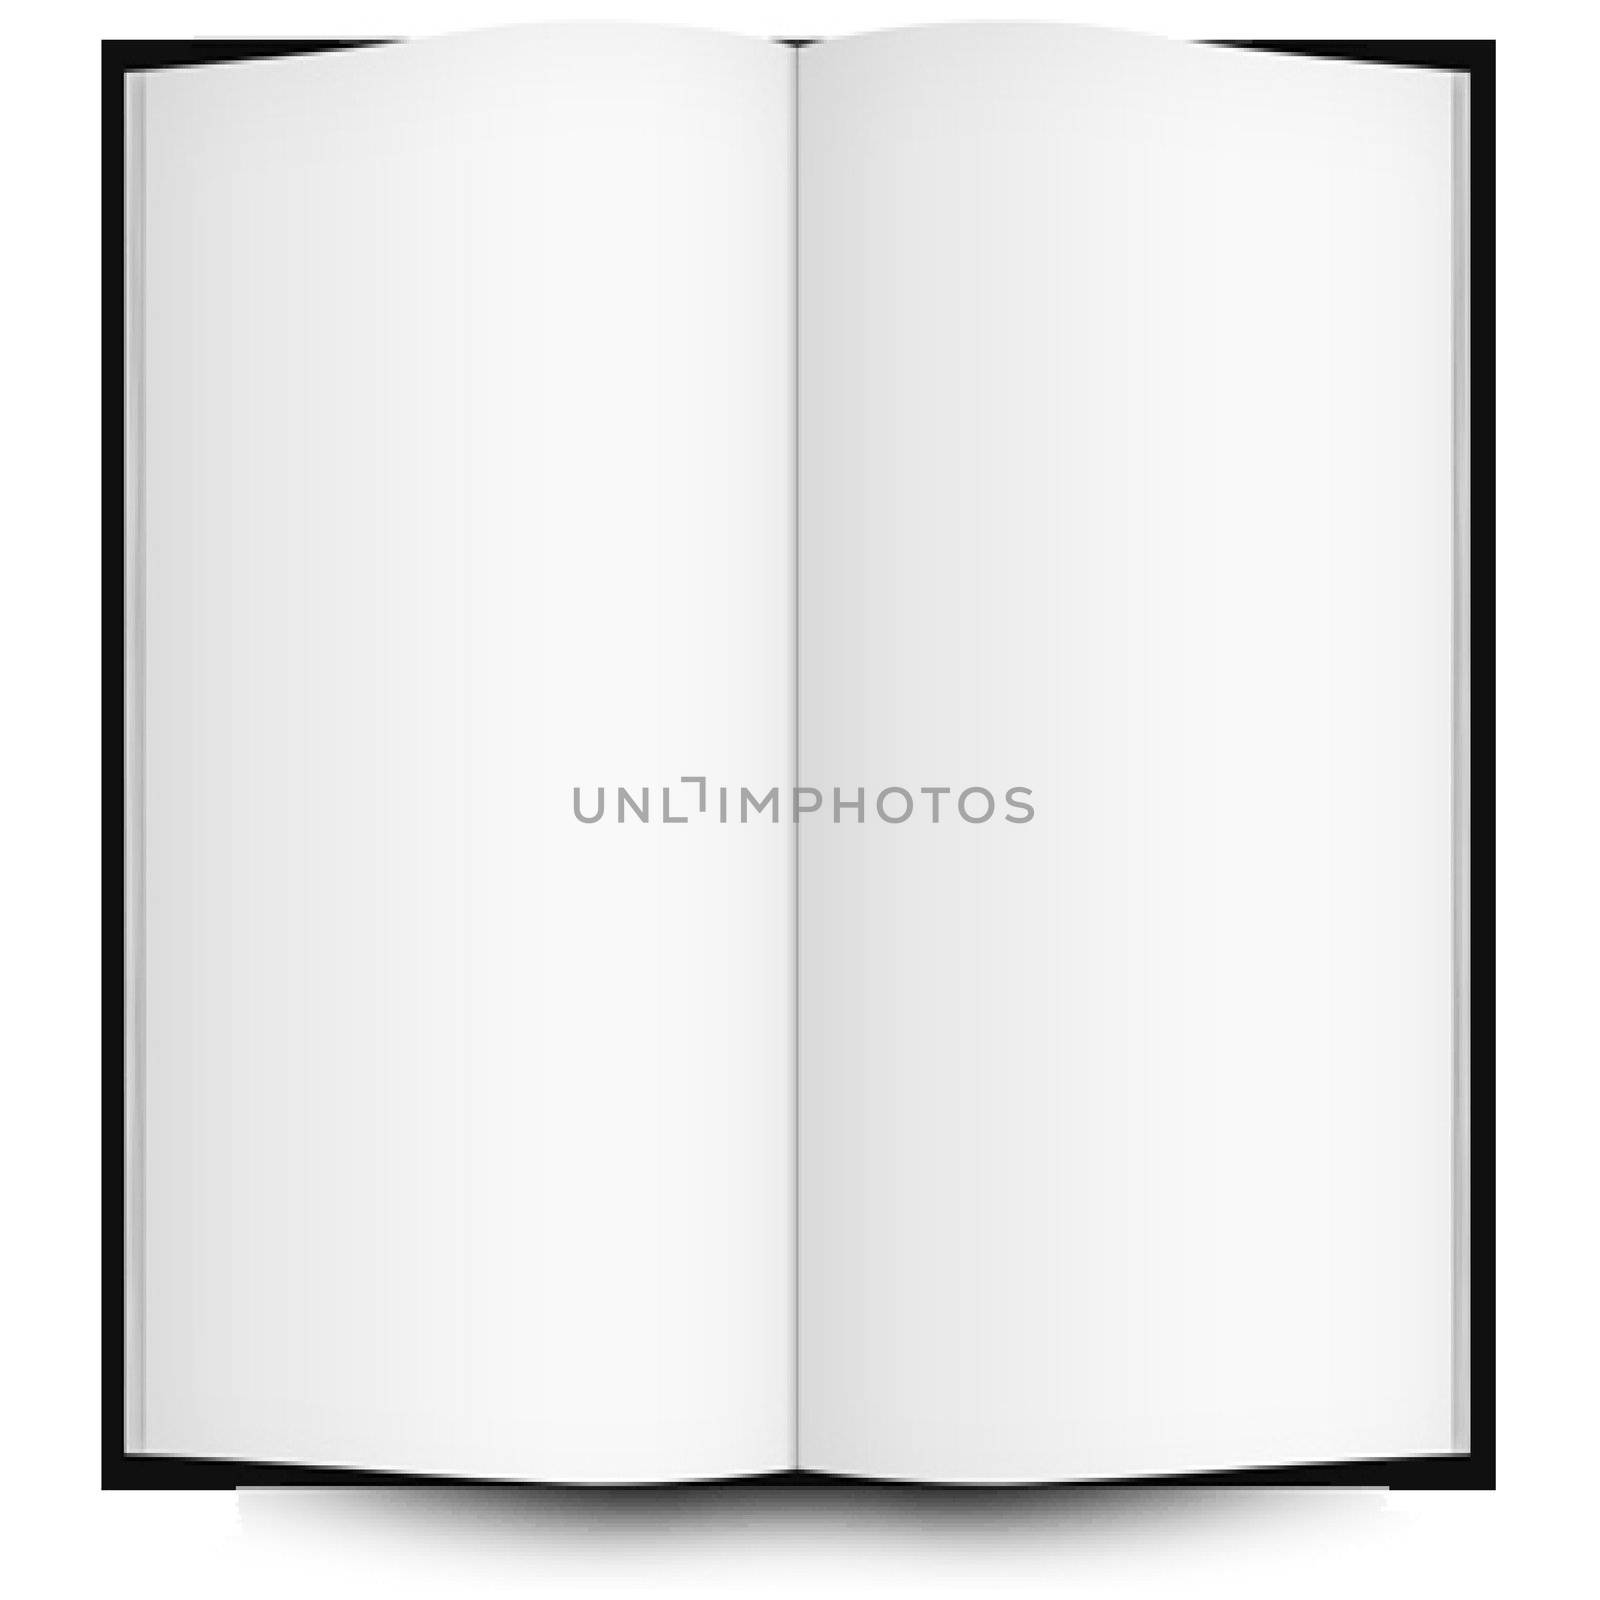 open book with blank pages, abstract vector art illustration